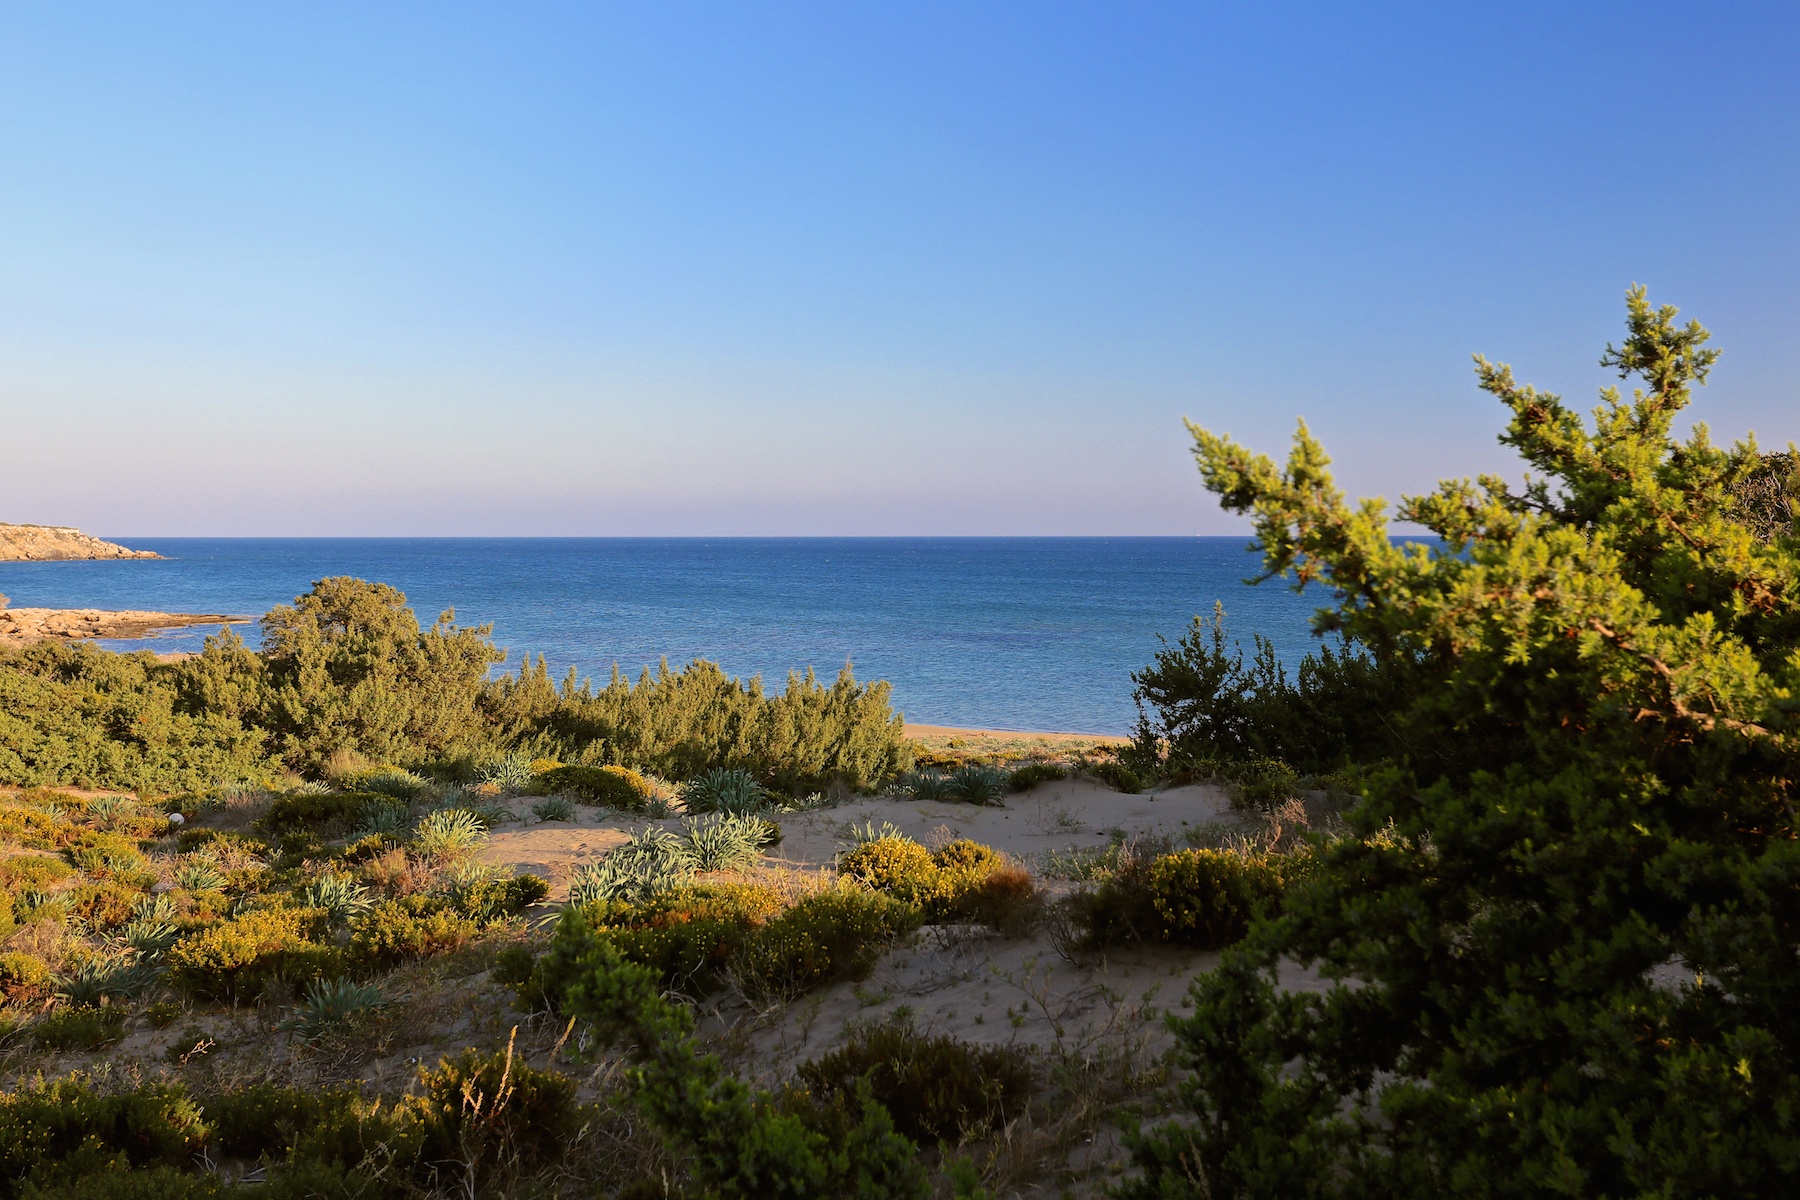 Blue sea for miles, land for sale in Rhodes, Greece